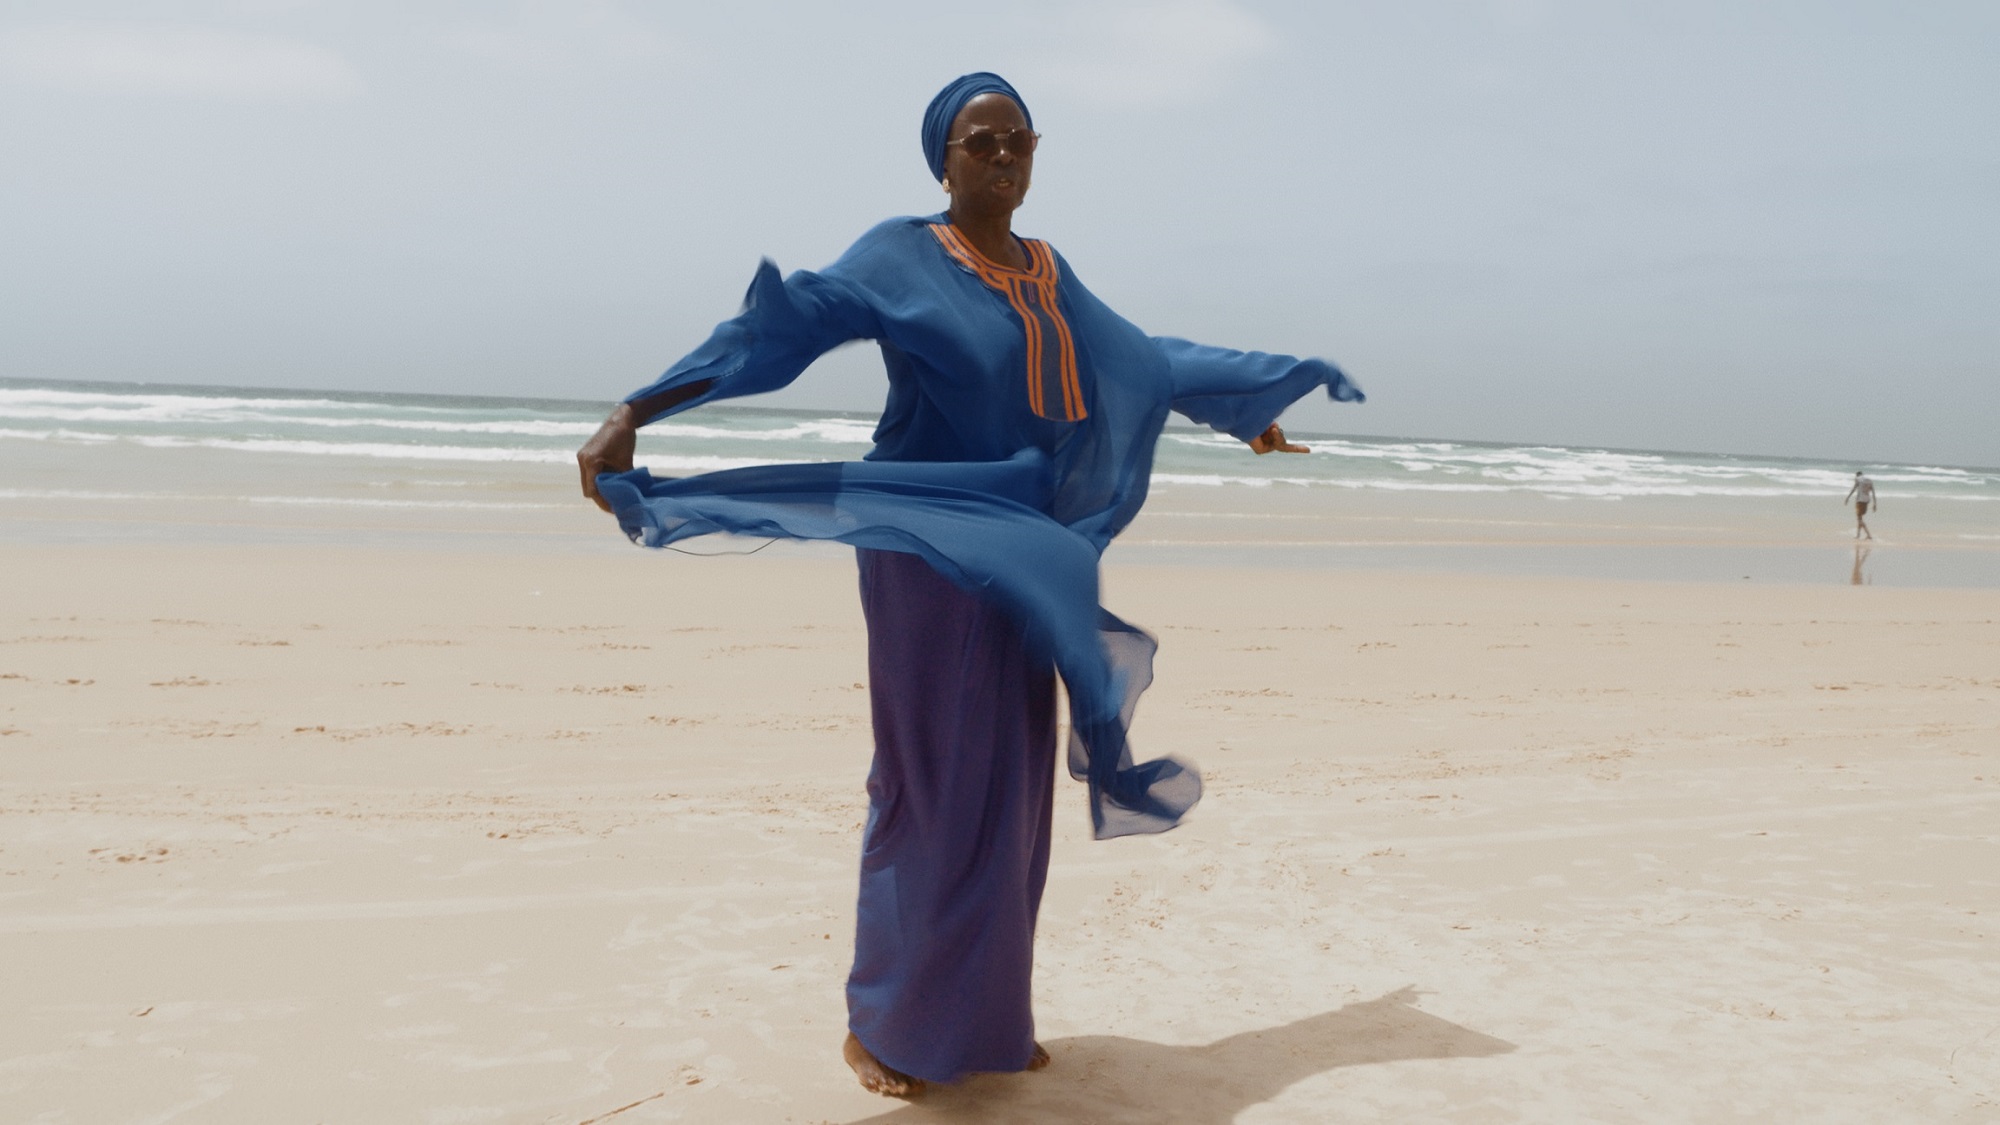 still from Leviathan Cycle Episode 7: Africana, Ken Bugul & Nemo by Shezad Dawood | EARTH RISING | Thursday 21 September – Sunday 24 September 2023 | IMMA | Image: still from Leviathan Cycle Episode 7: Africana, Ken Bugul & Nemo by Shezad Dawood | someone on a beach in flowing blue, purple and orange clothing, arms outstretched; sunglasses, and face turned towards the camera; beach and sea in the background, stretching to the tilted horizon; figure walking towards the sea towards the right edge of the photo 